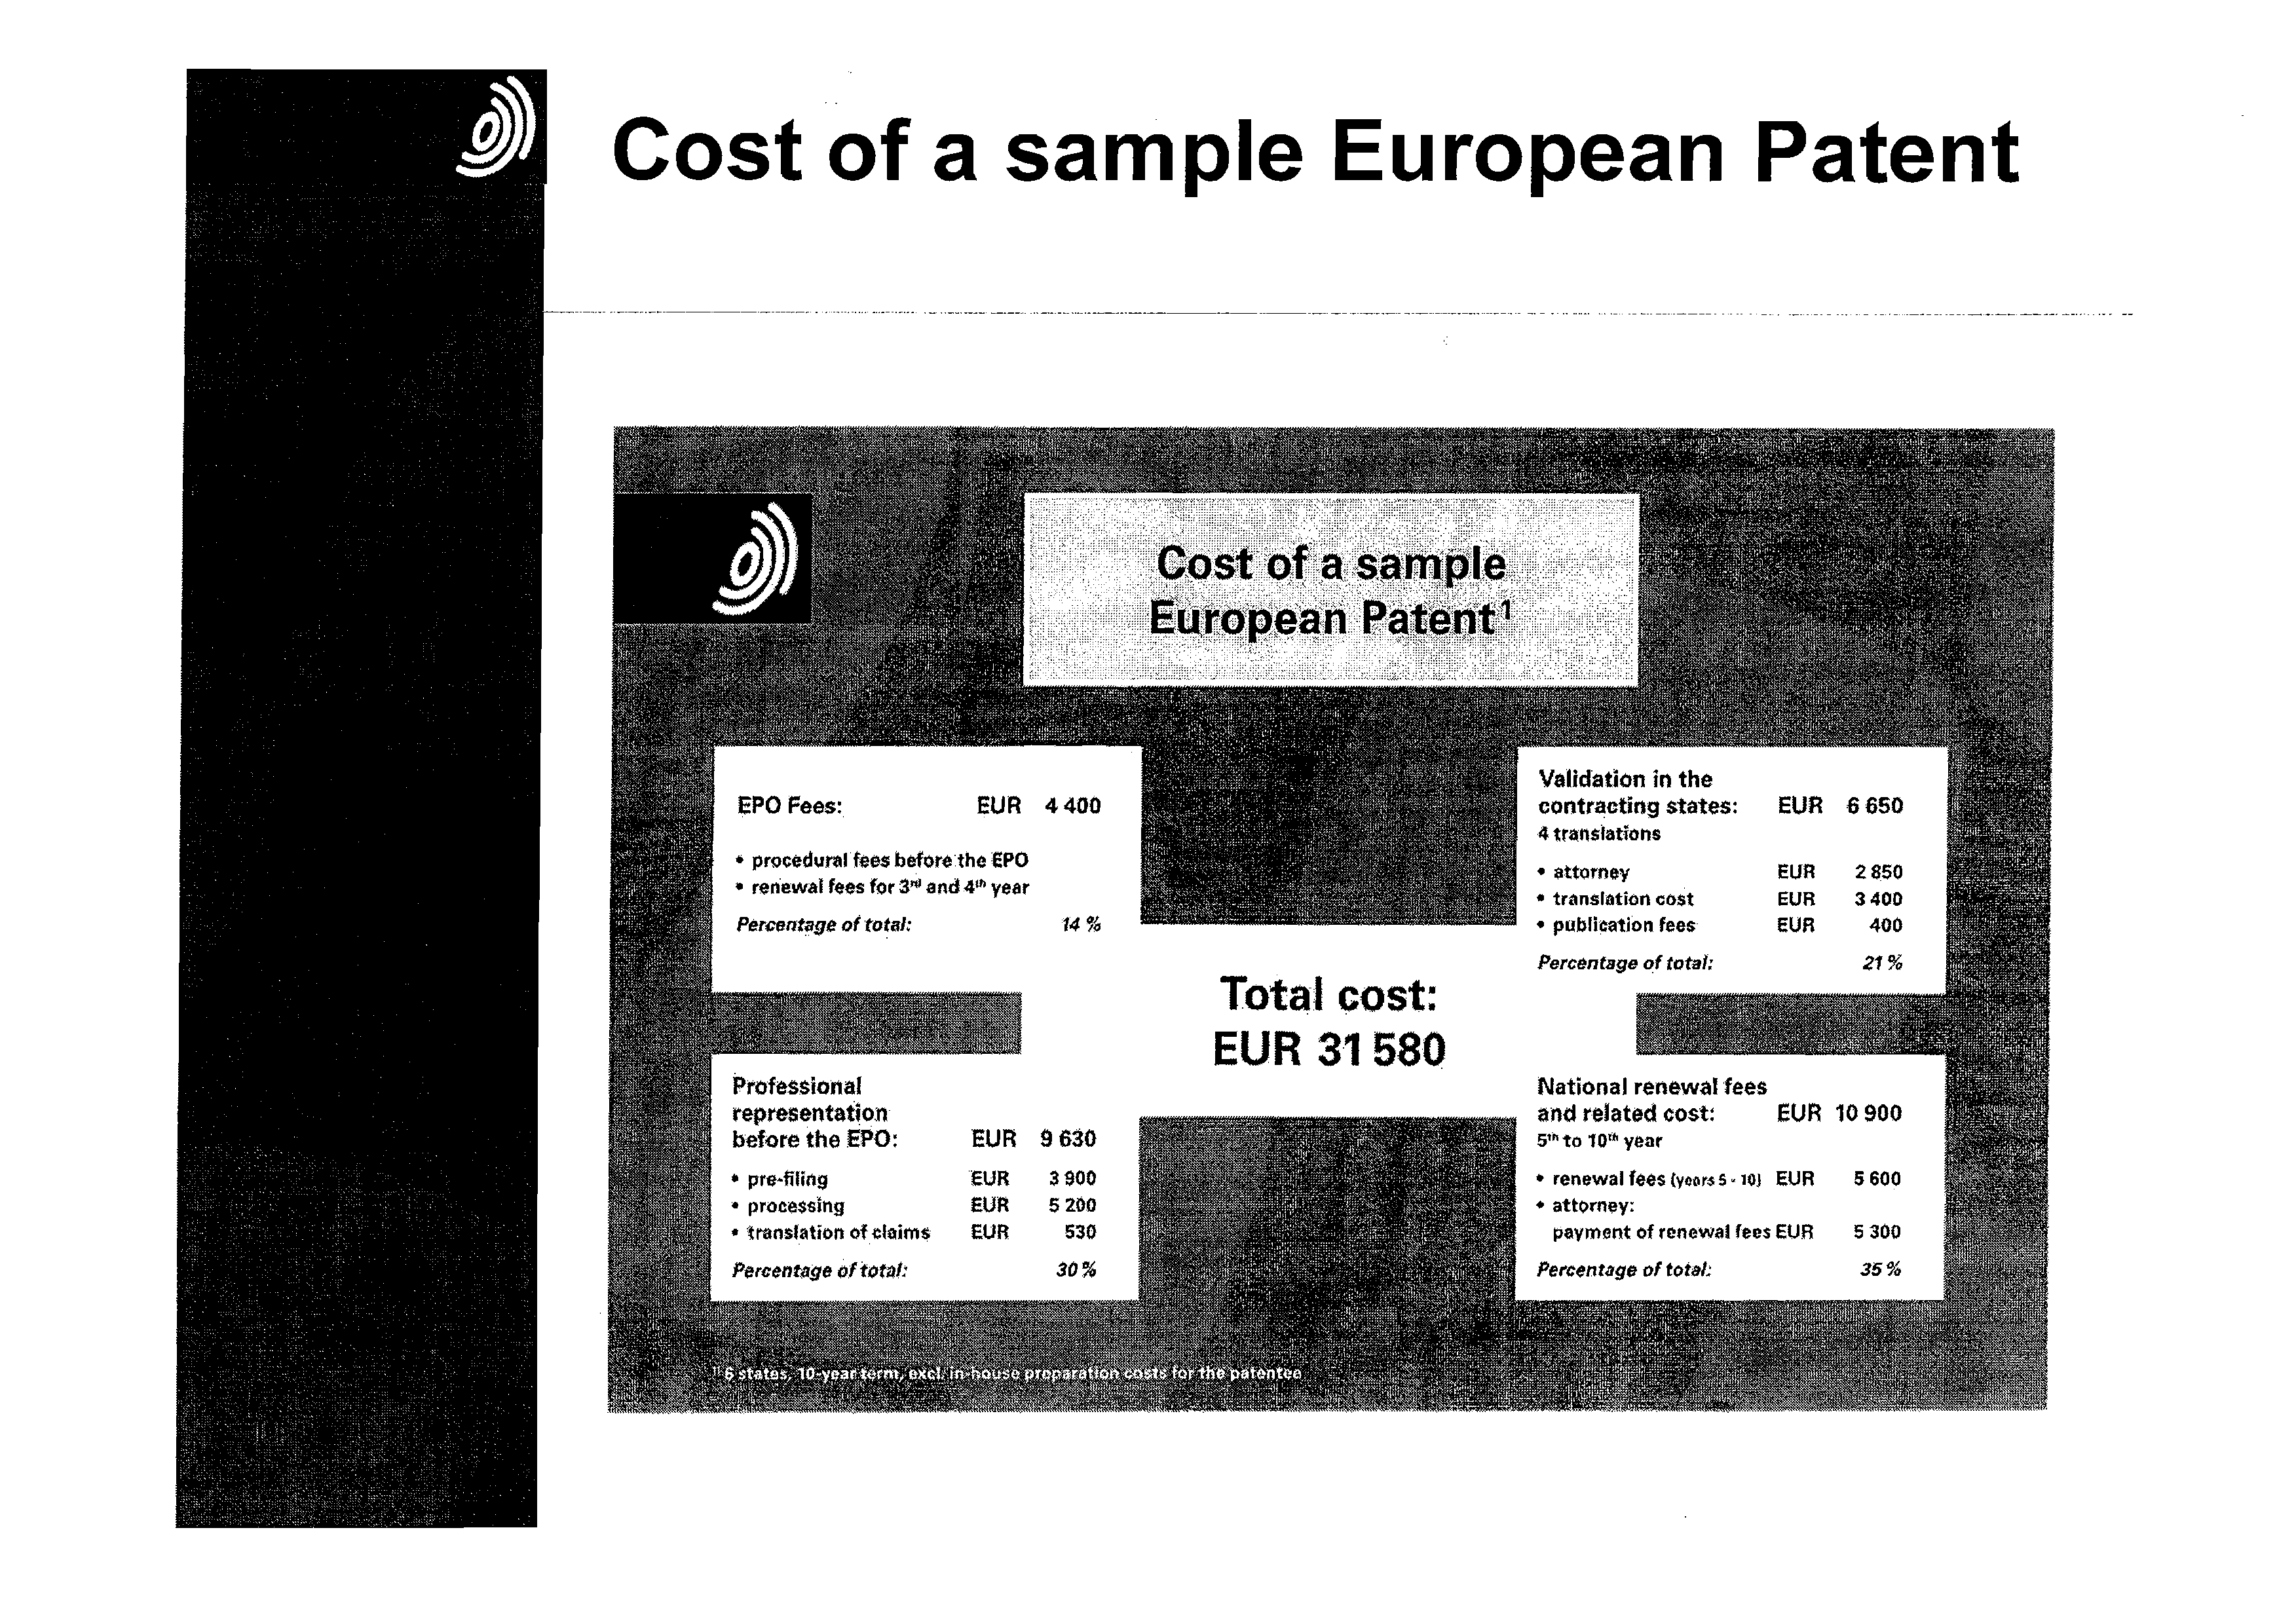 Cost of a sample European atent before the EO: National renewal fees and related cost: E 10 900 E 3 900 renewal fees (